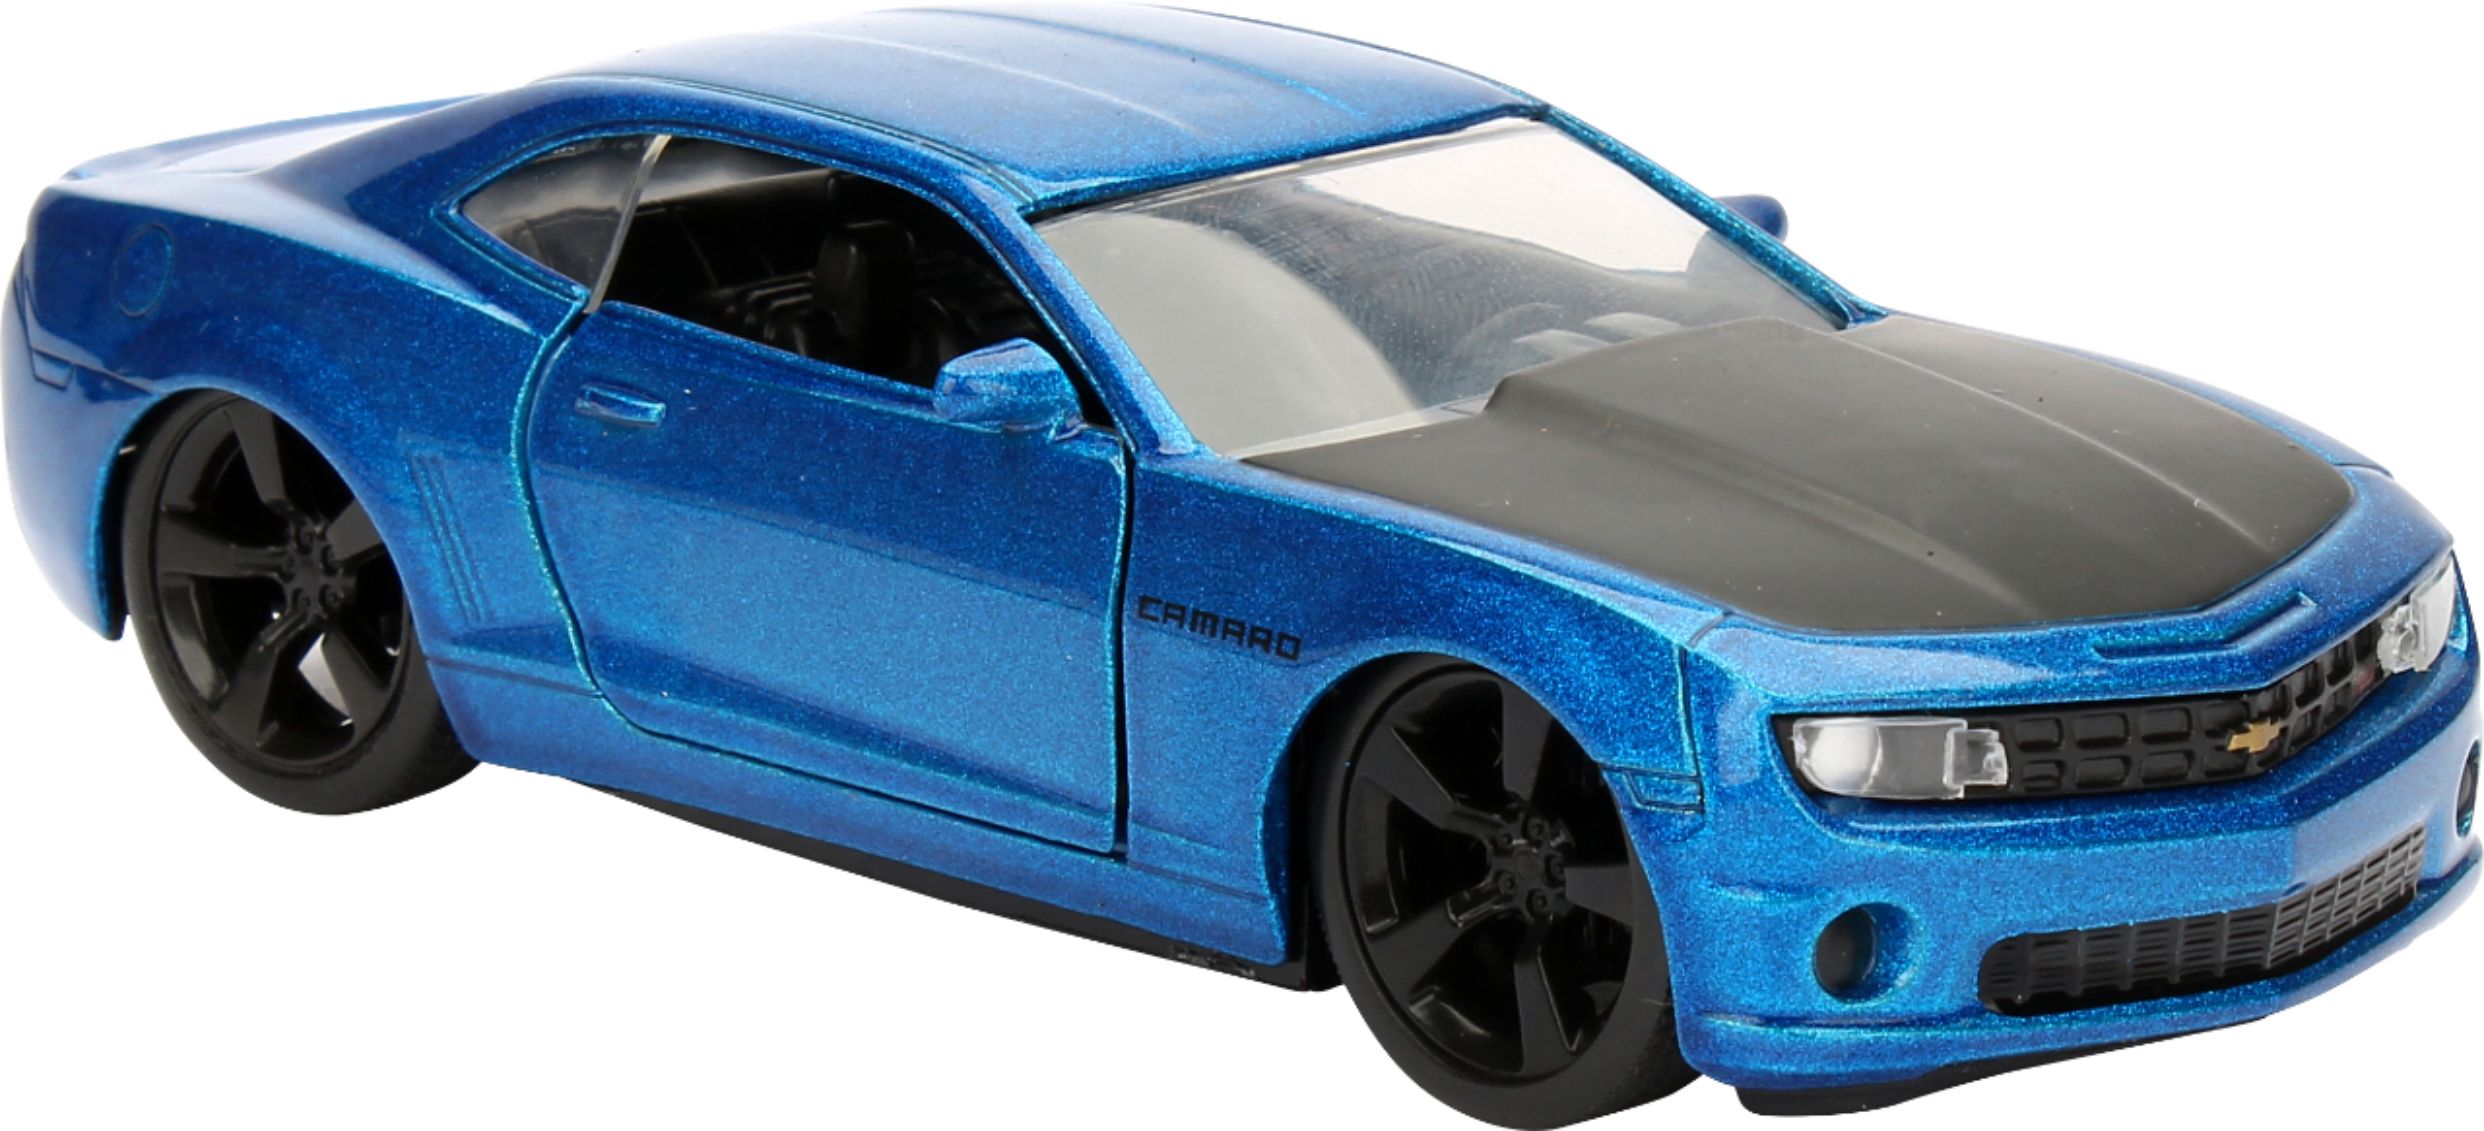 big time muscle car toys